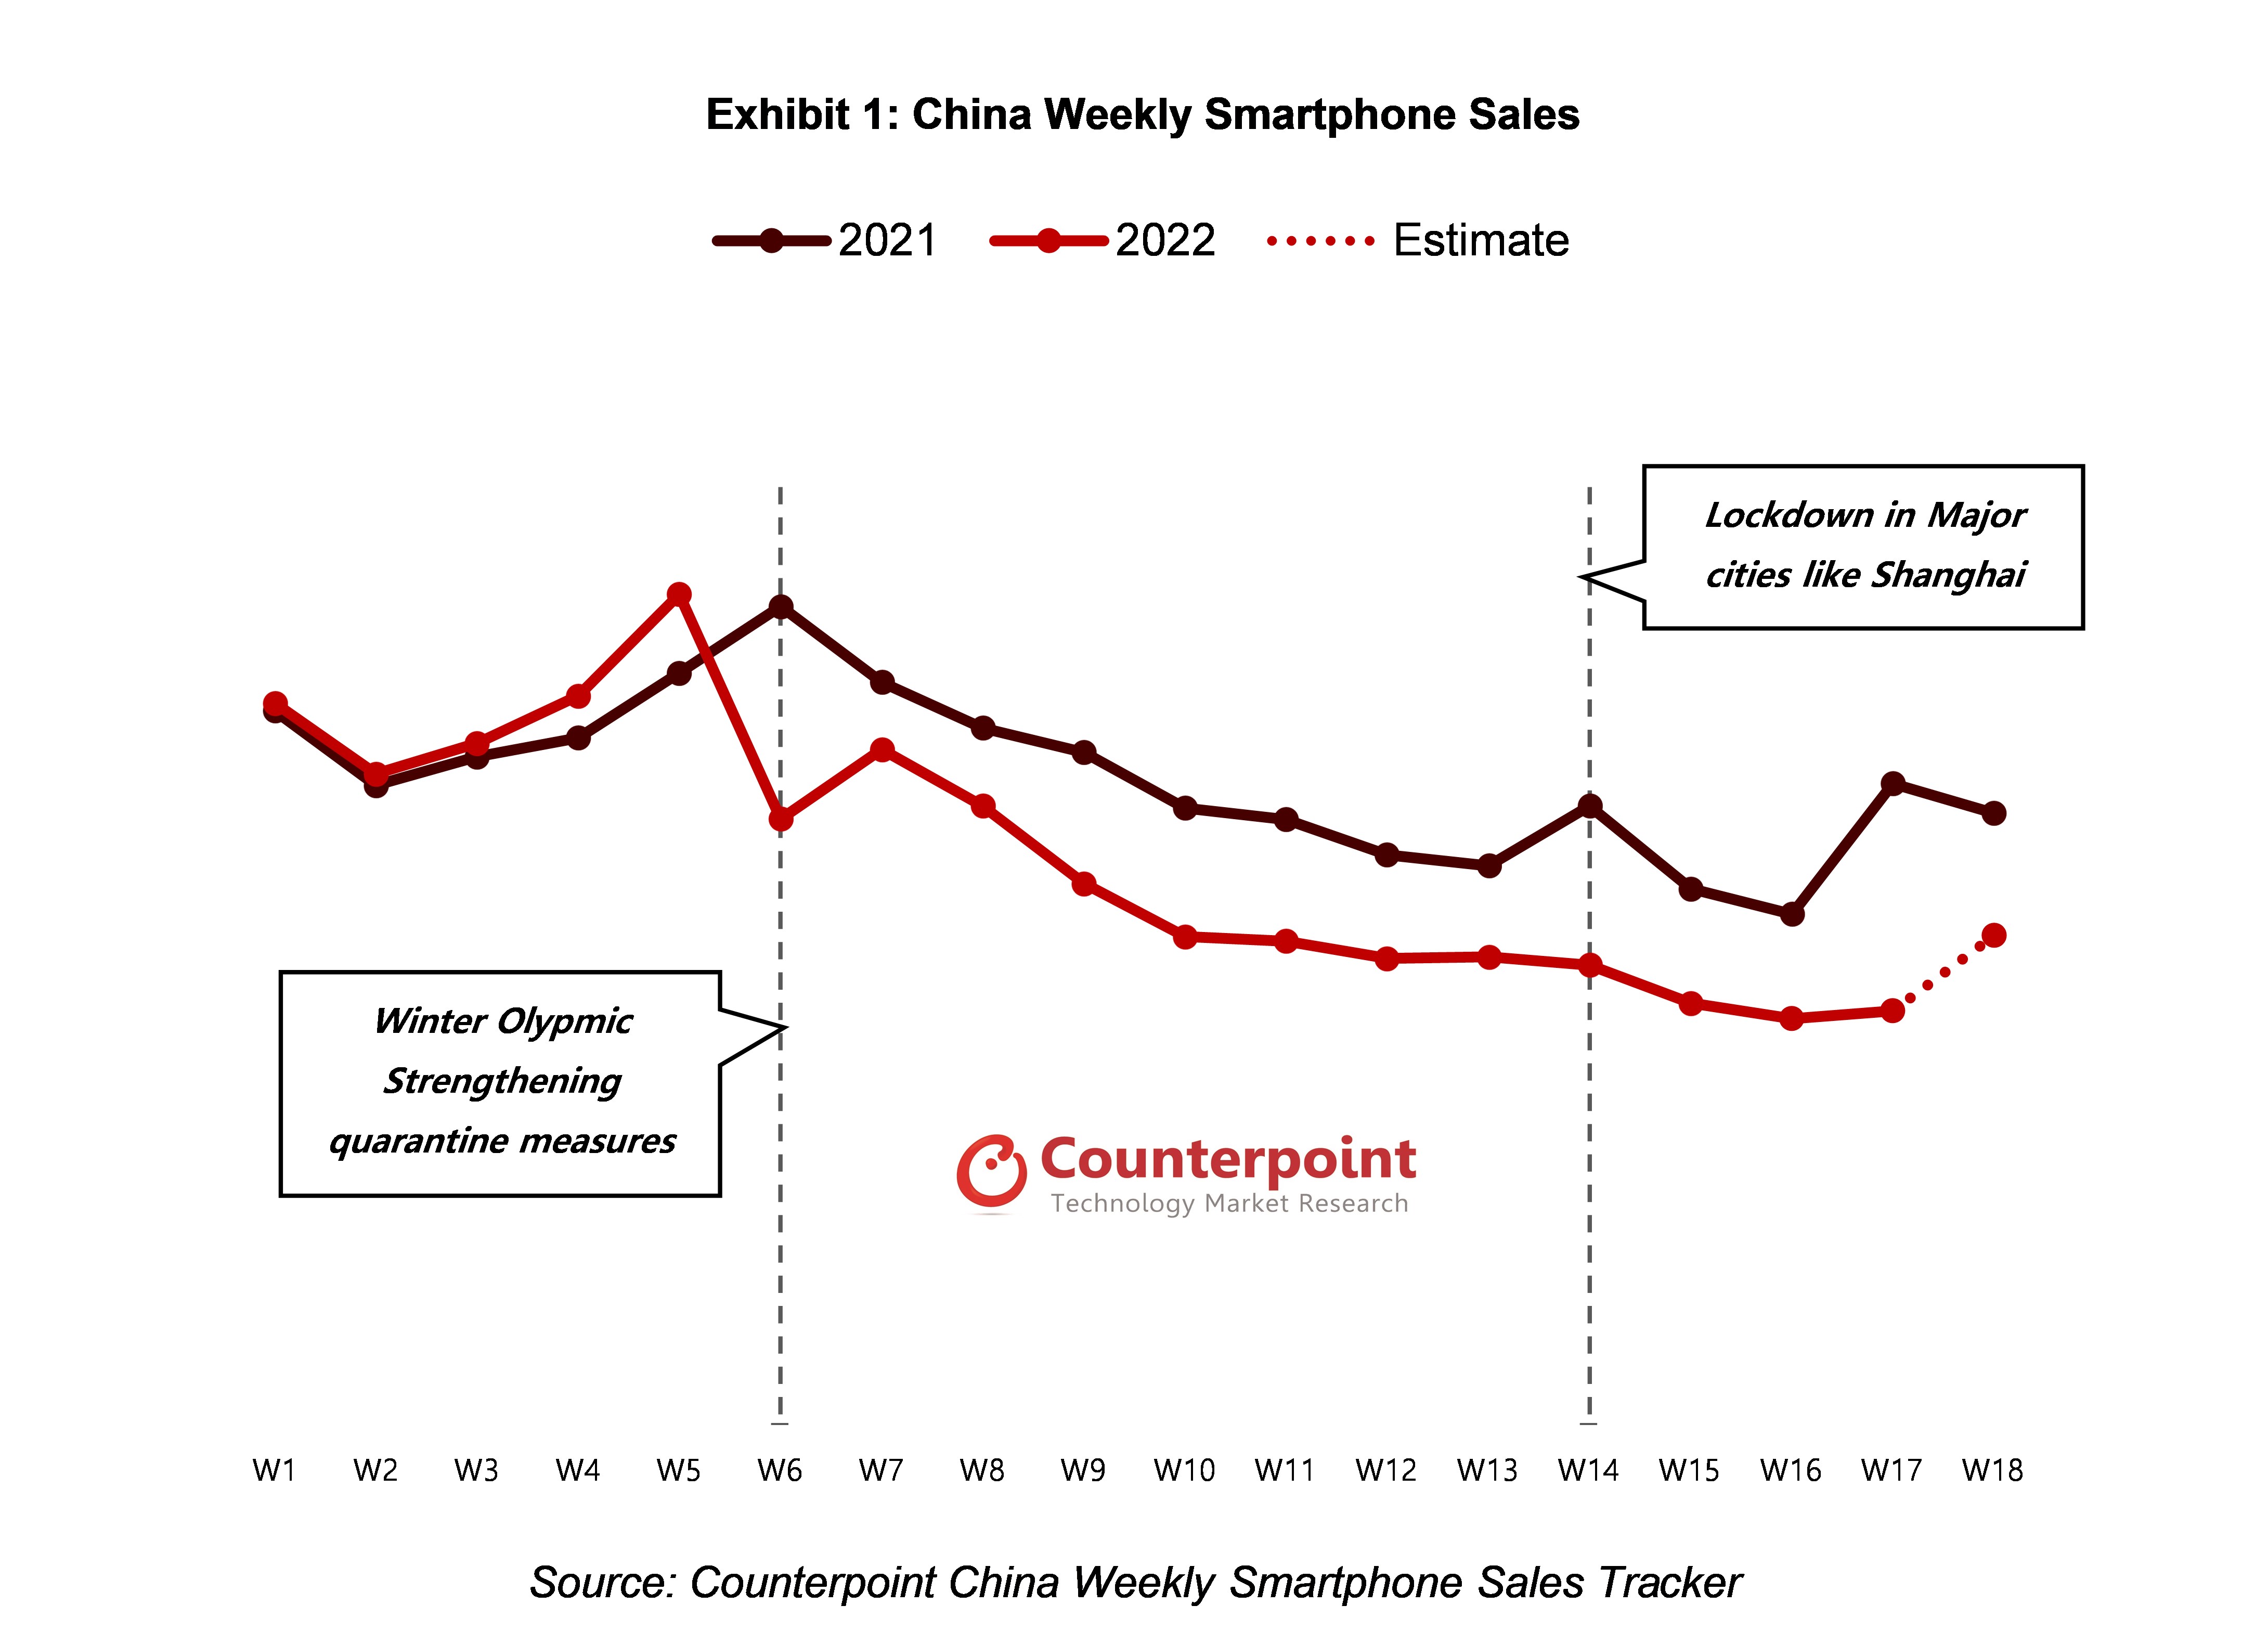 China Weekly Smartphone Sales Counterpoint Research